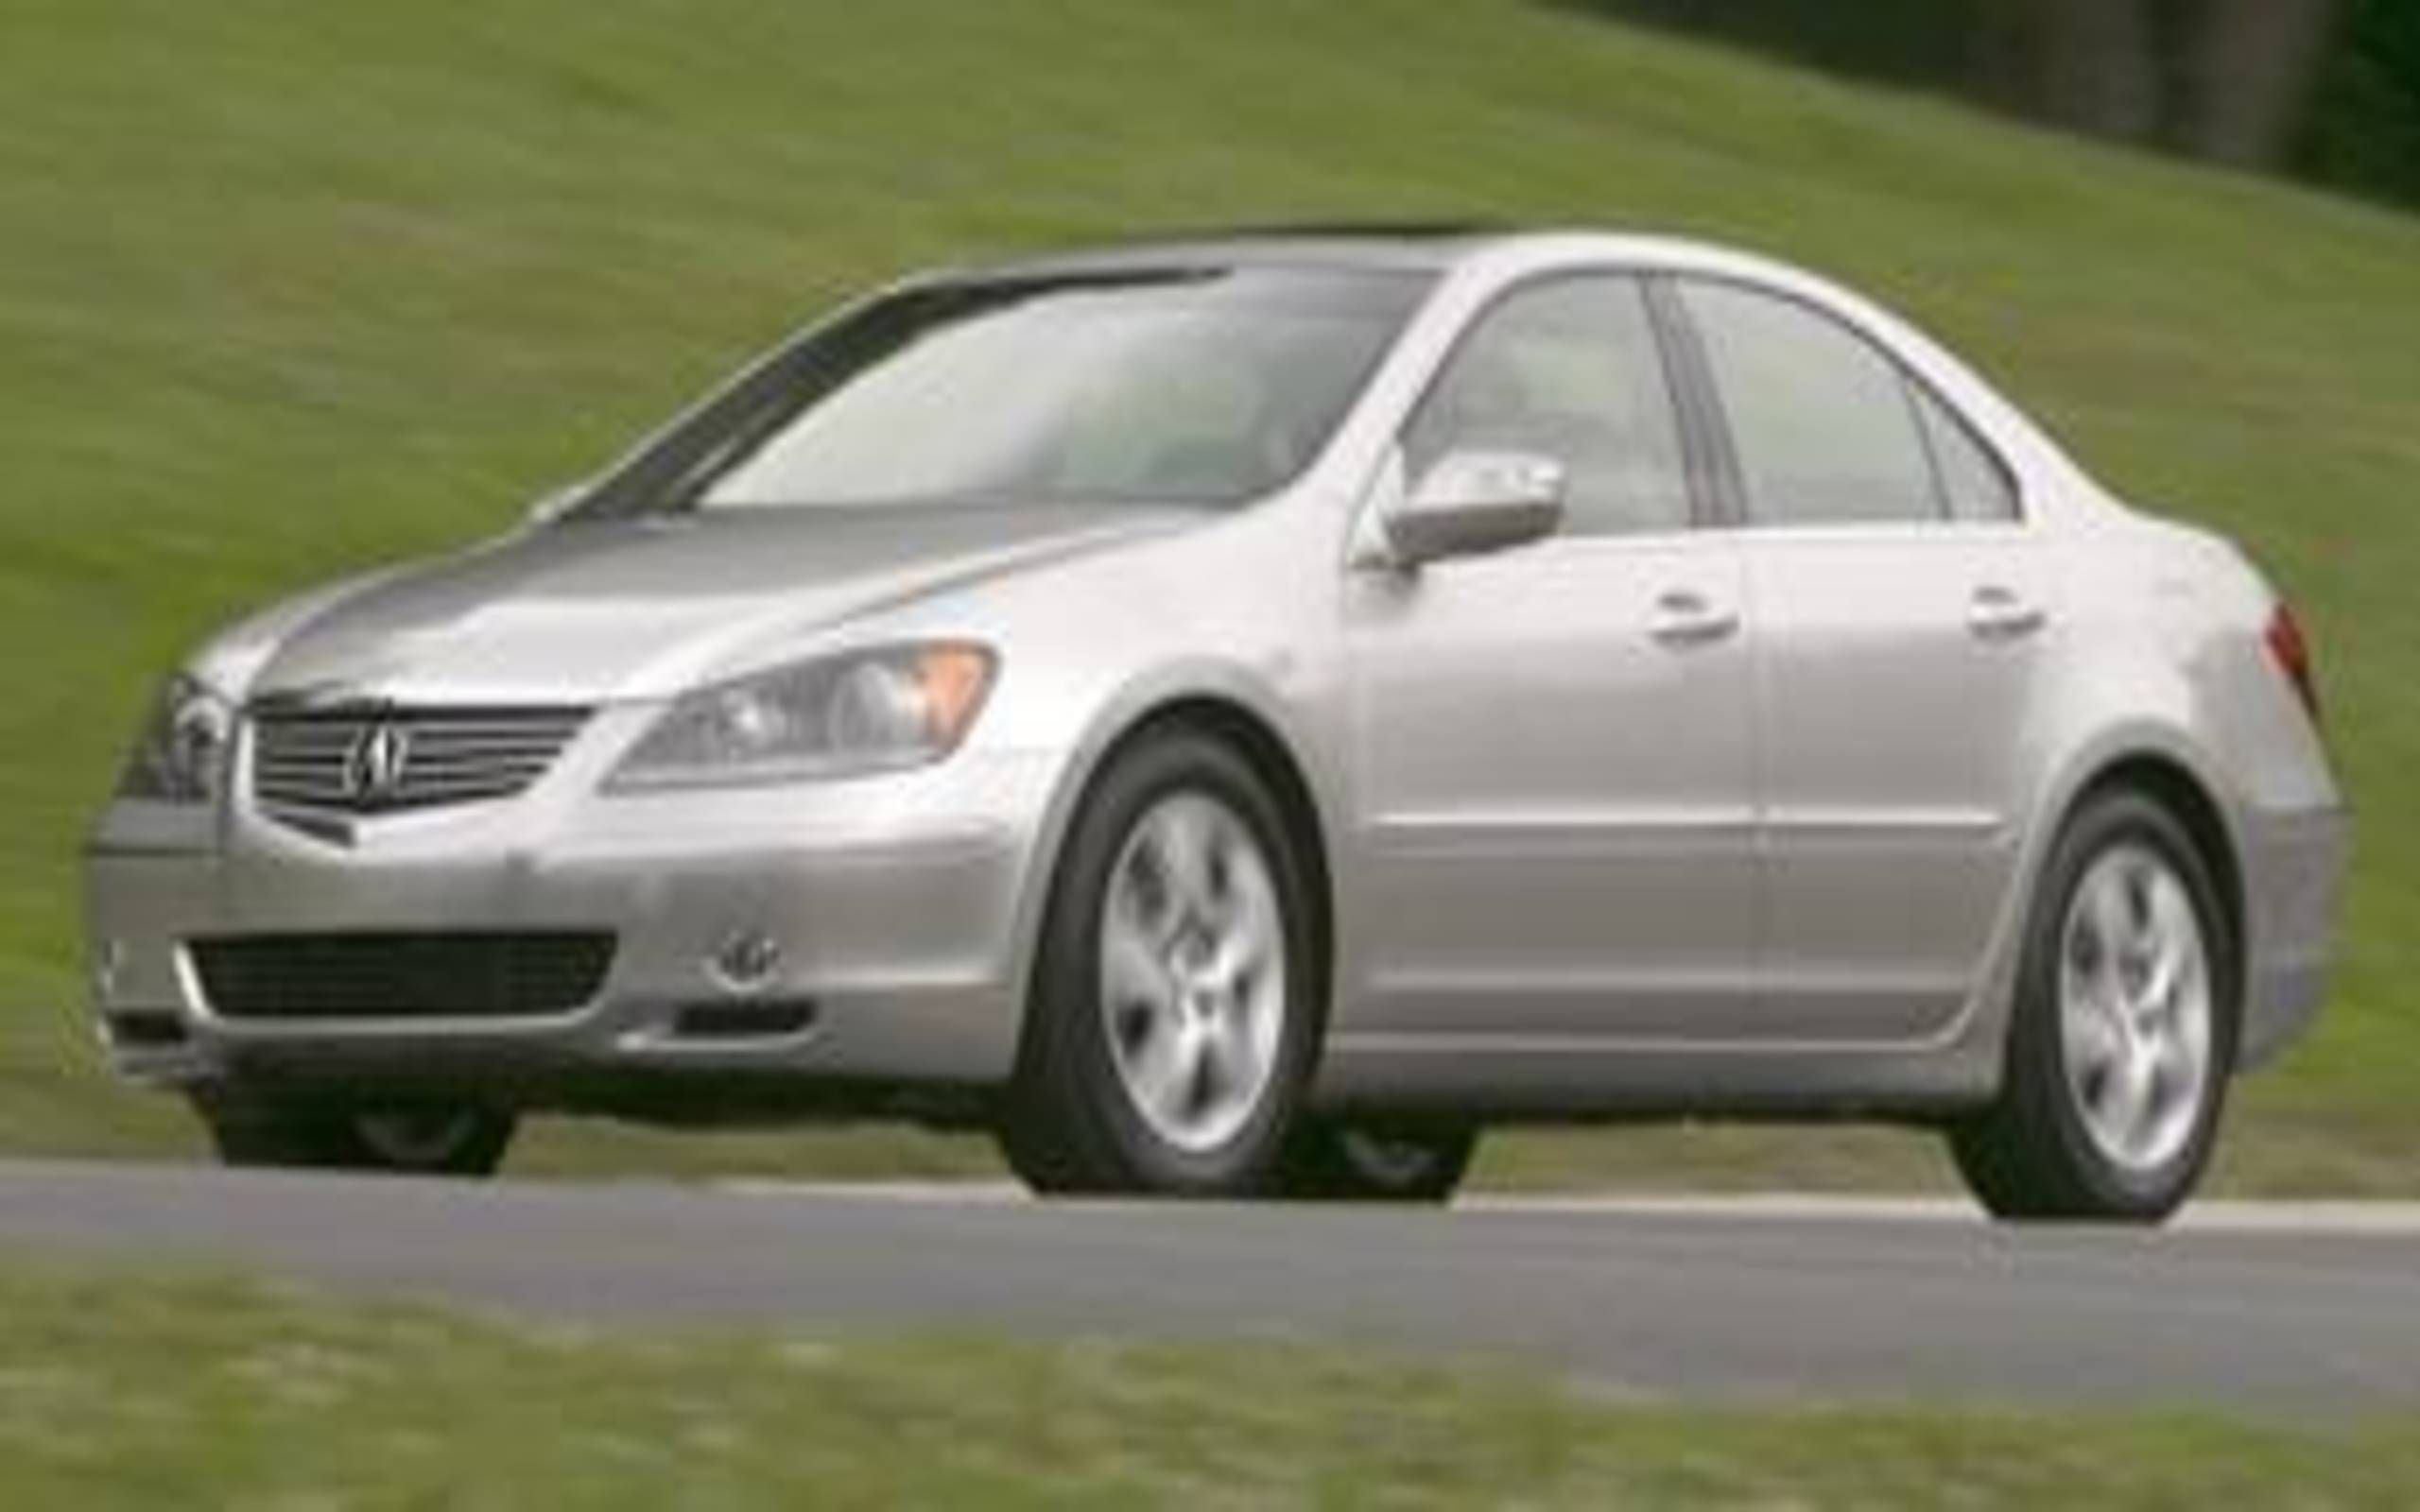 2005 Acura RL: Acura has found its way back to the big game with the new RL